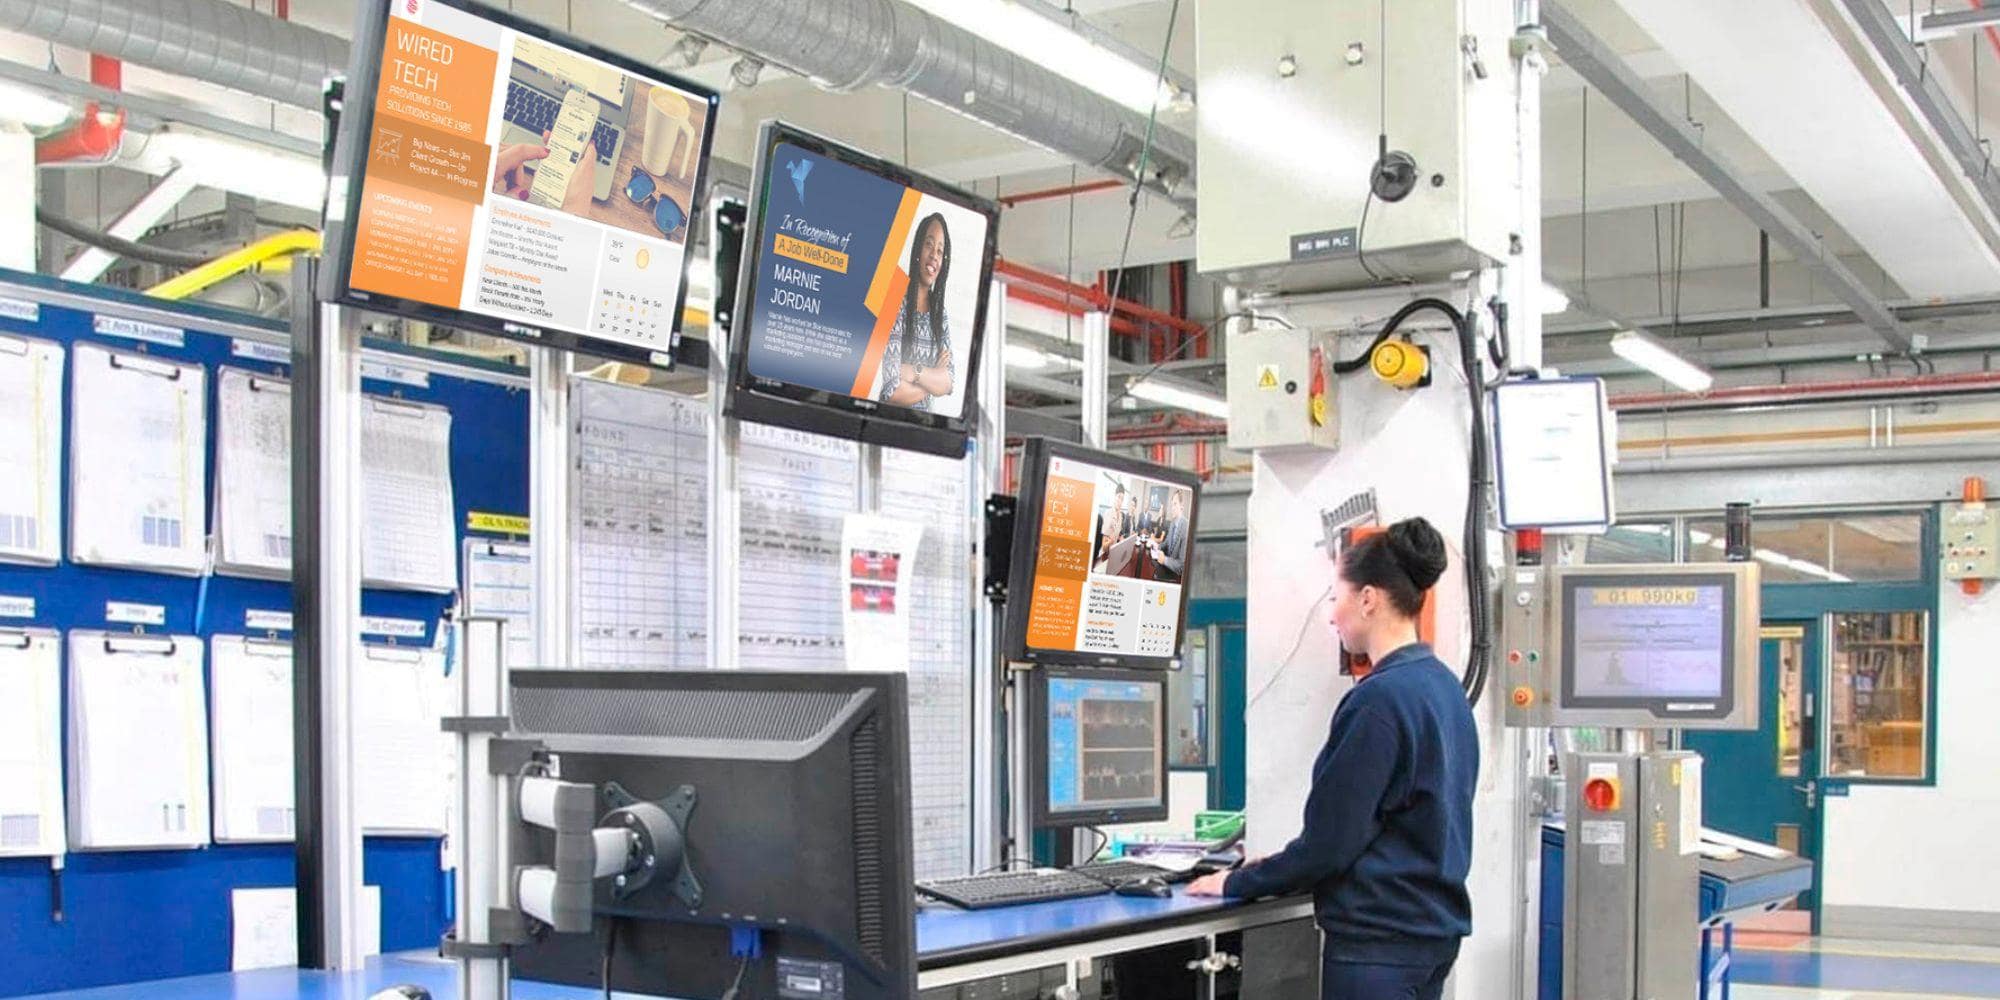 A worker surrounded by screens serving content with the help of enterprise digital signage.